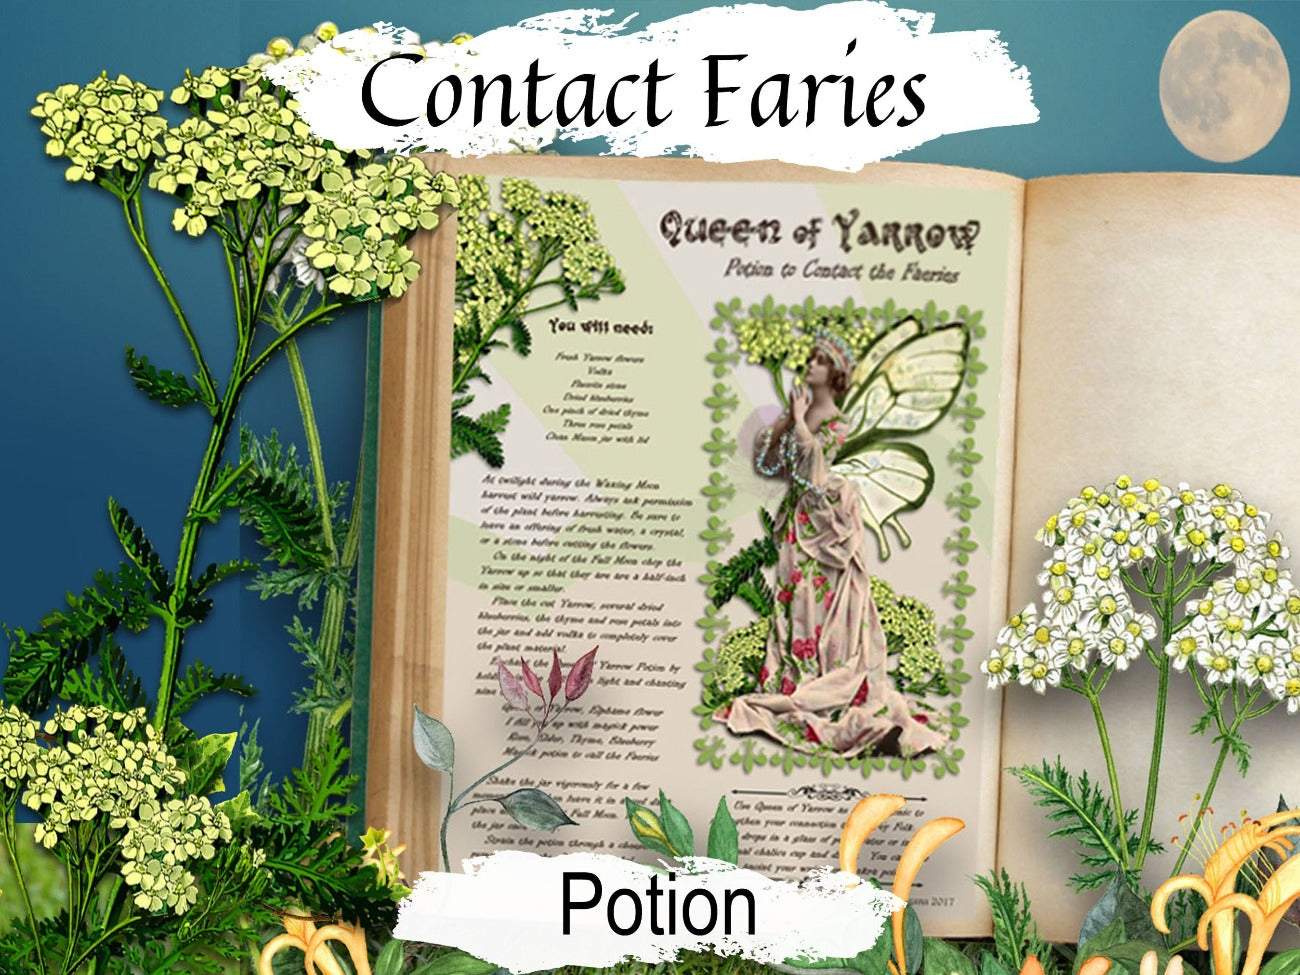 QUEEN of YARROW POTION, Fairy Contact Potion, Wicca Fairy Prayer Spell, Yarrow Herb Witchcraft, Fairy Realm See Fairies, Fae Apothecary - Morgana Magick Spell